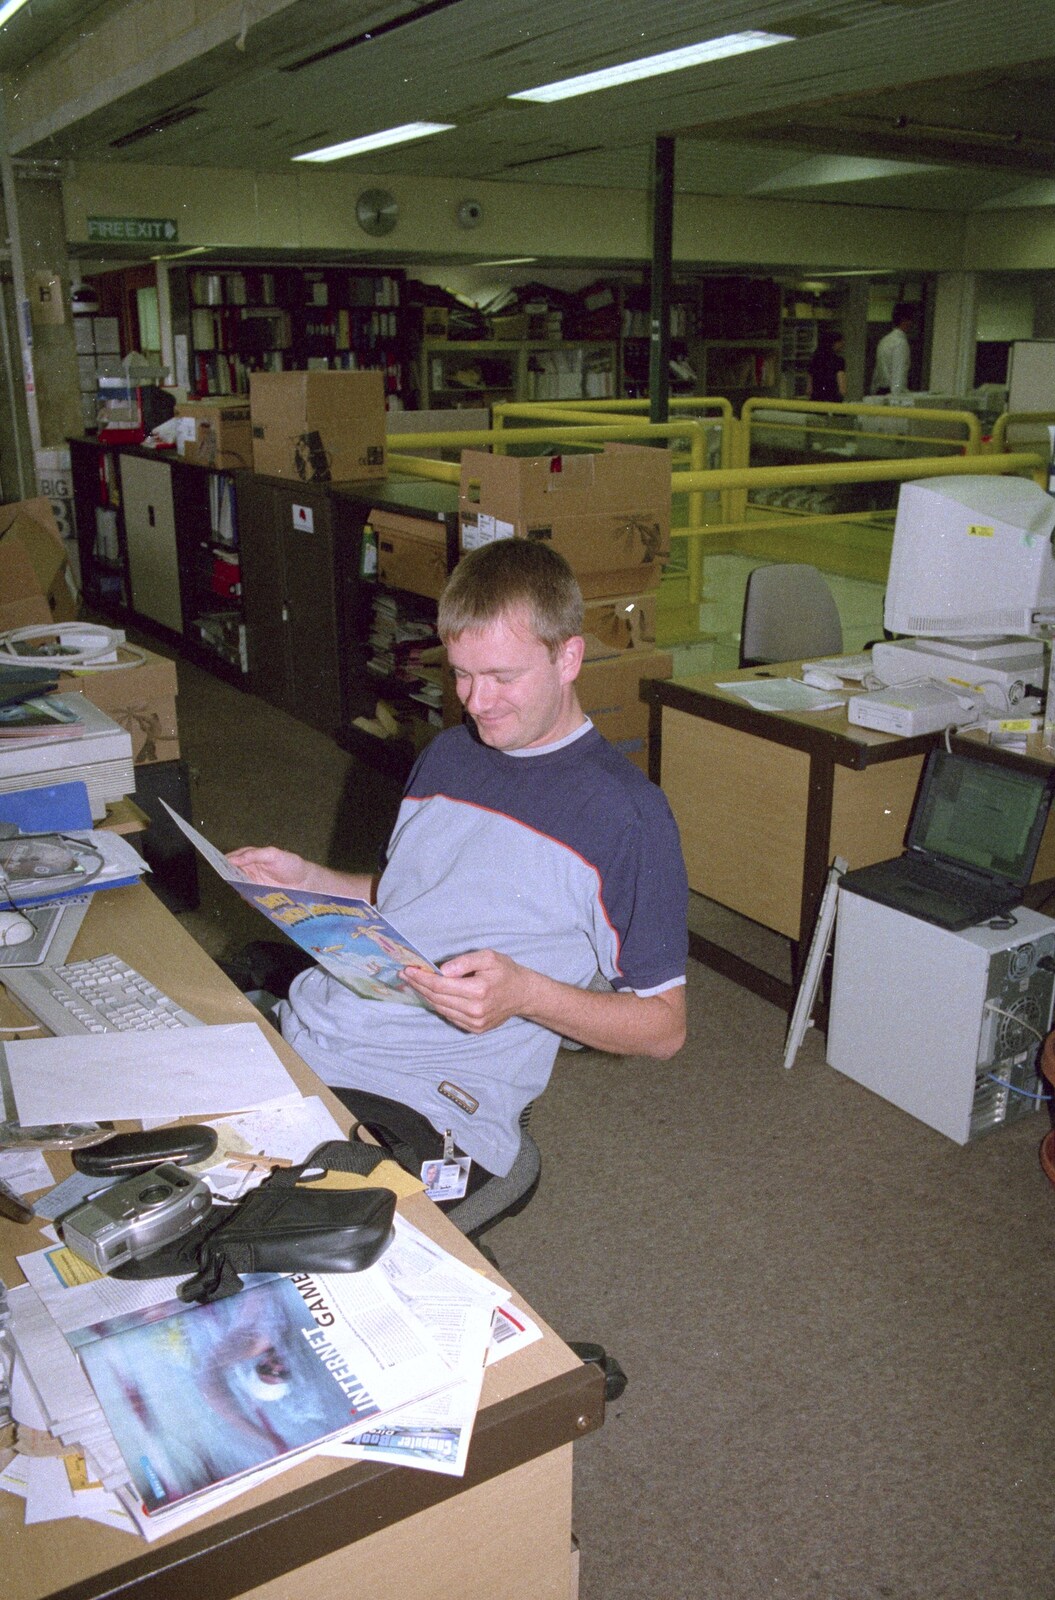 Nosher's Last Day at CISU/SCC, Suffolk County Council, Ipswich - 22nd June 2000: Nosher reads his leaving card